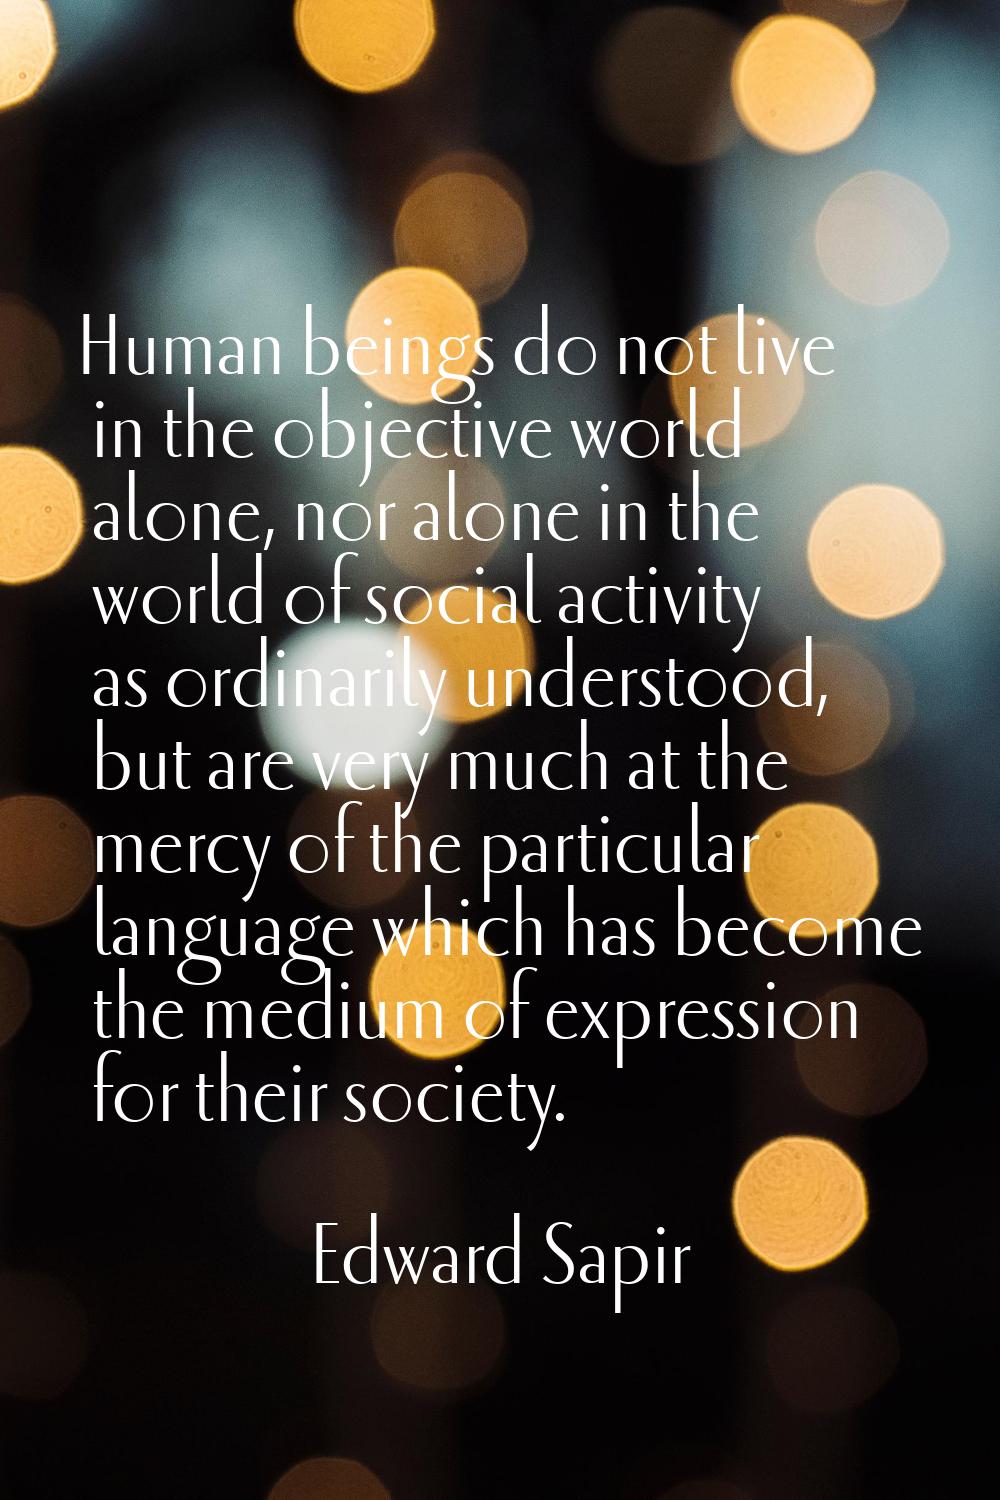 Human beings do not live in the objective world alone, nor alone in the world of social activity as